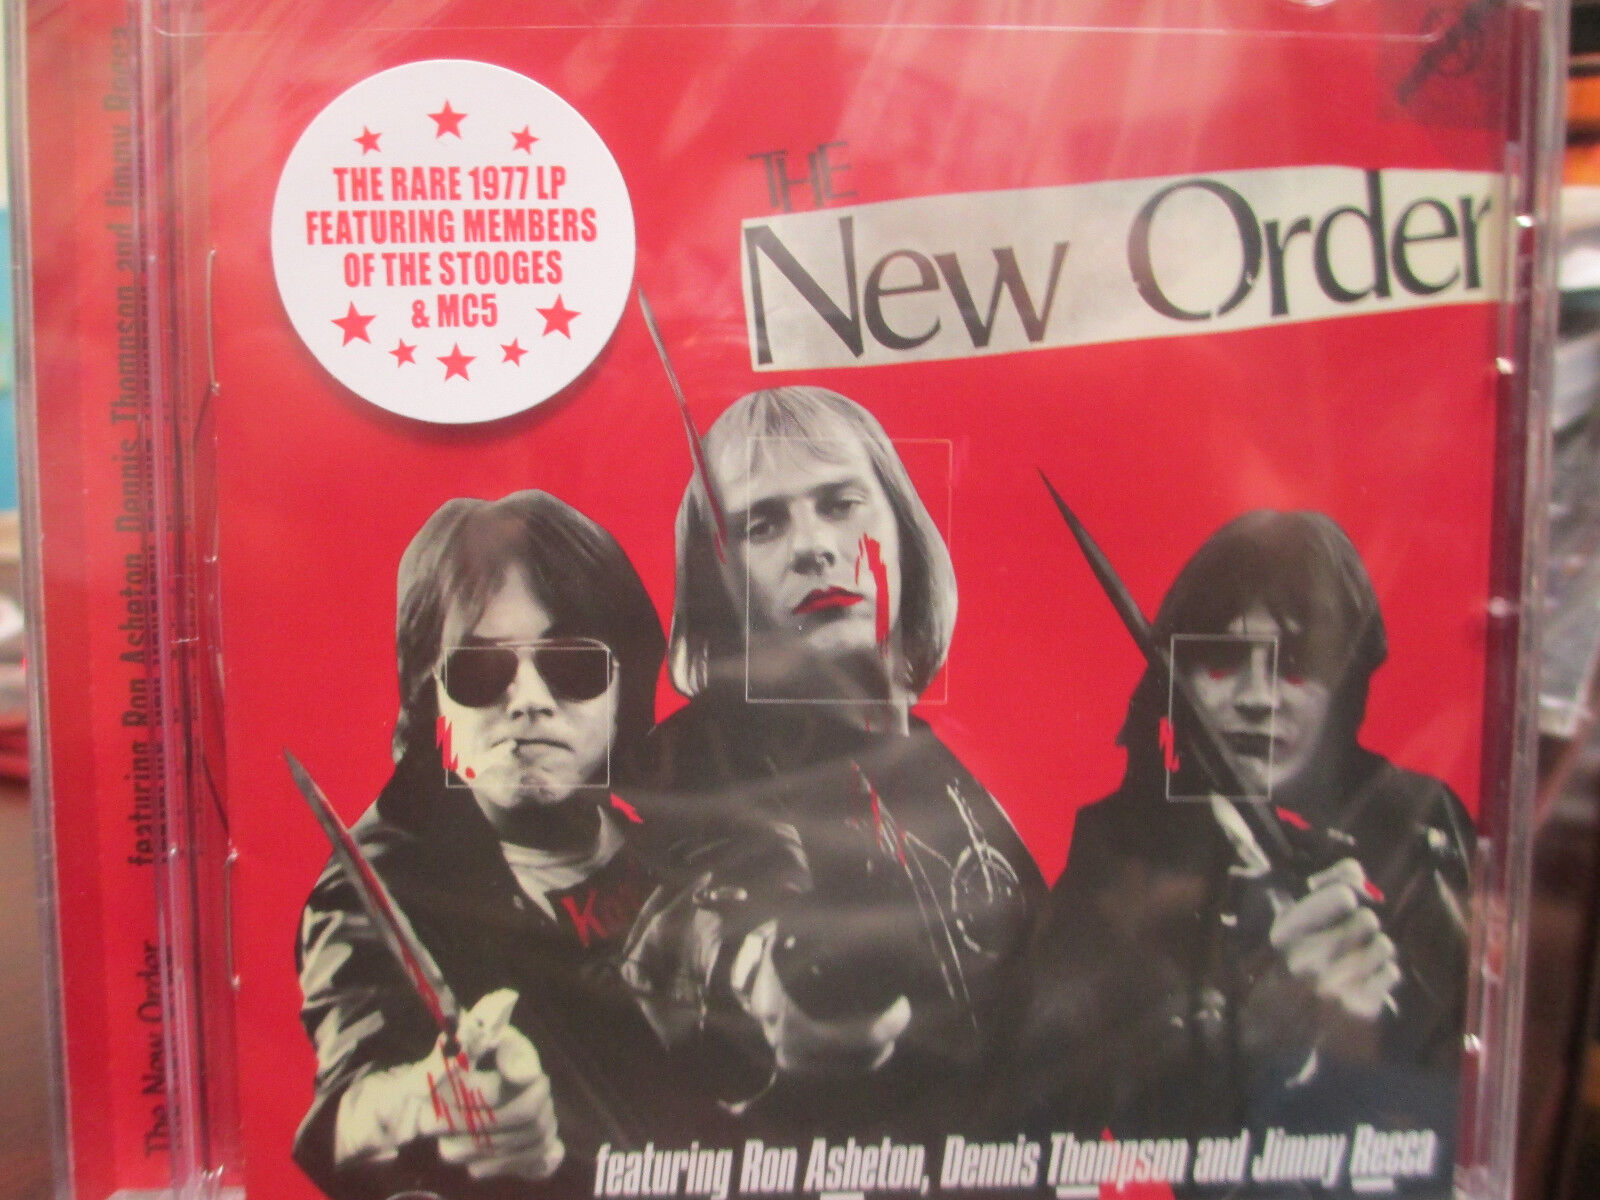 The new order cd featuring ron ashetondennis thompsonjimmy recca stoogesmc